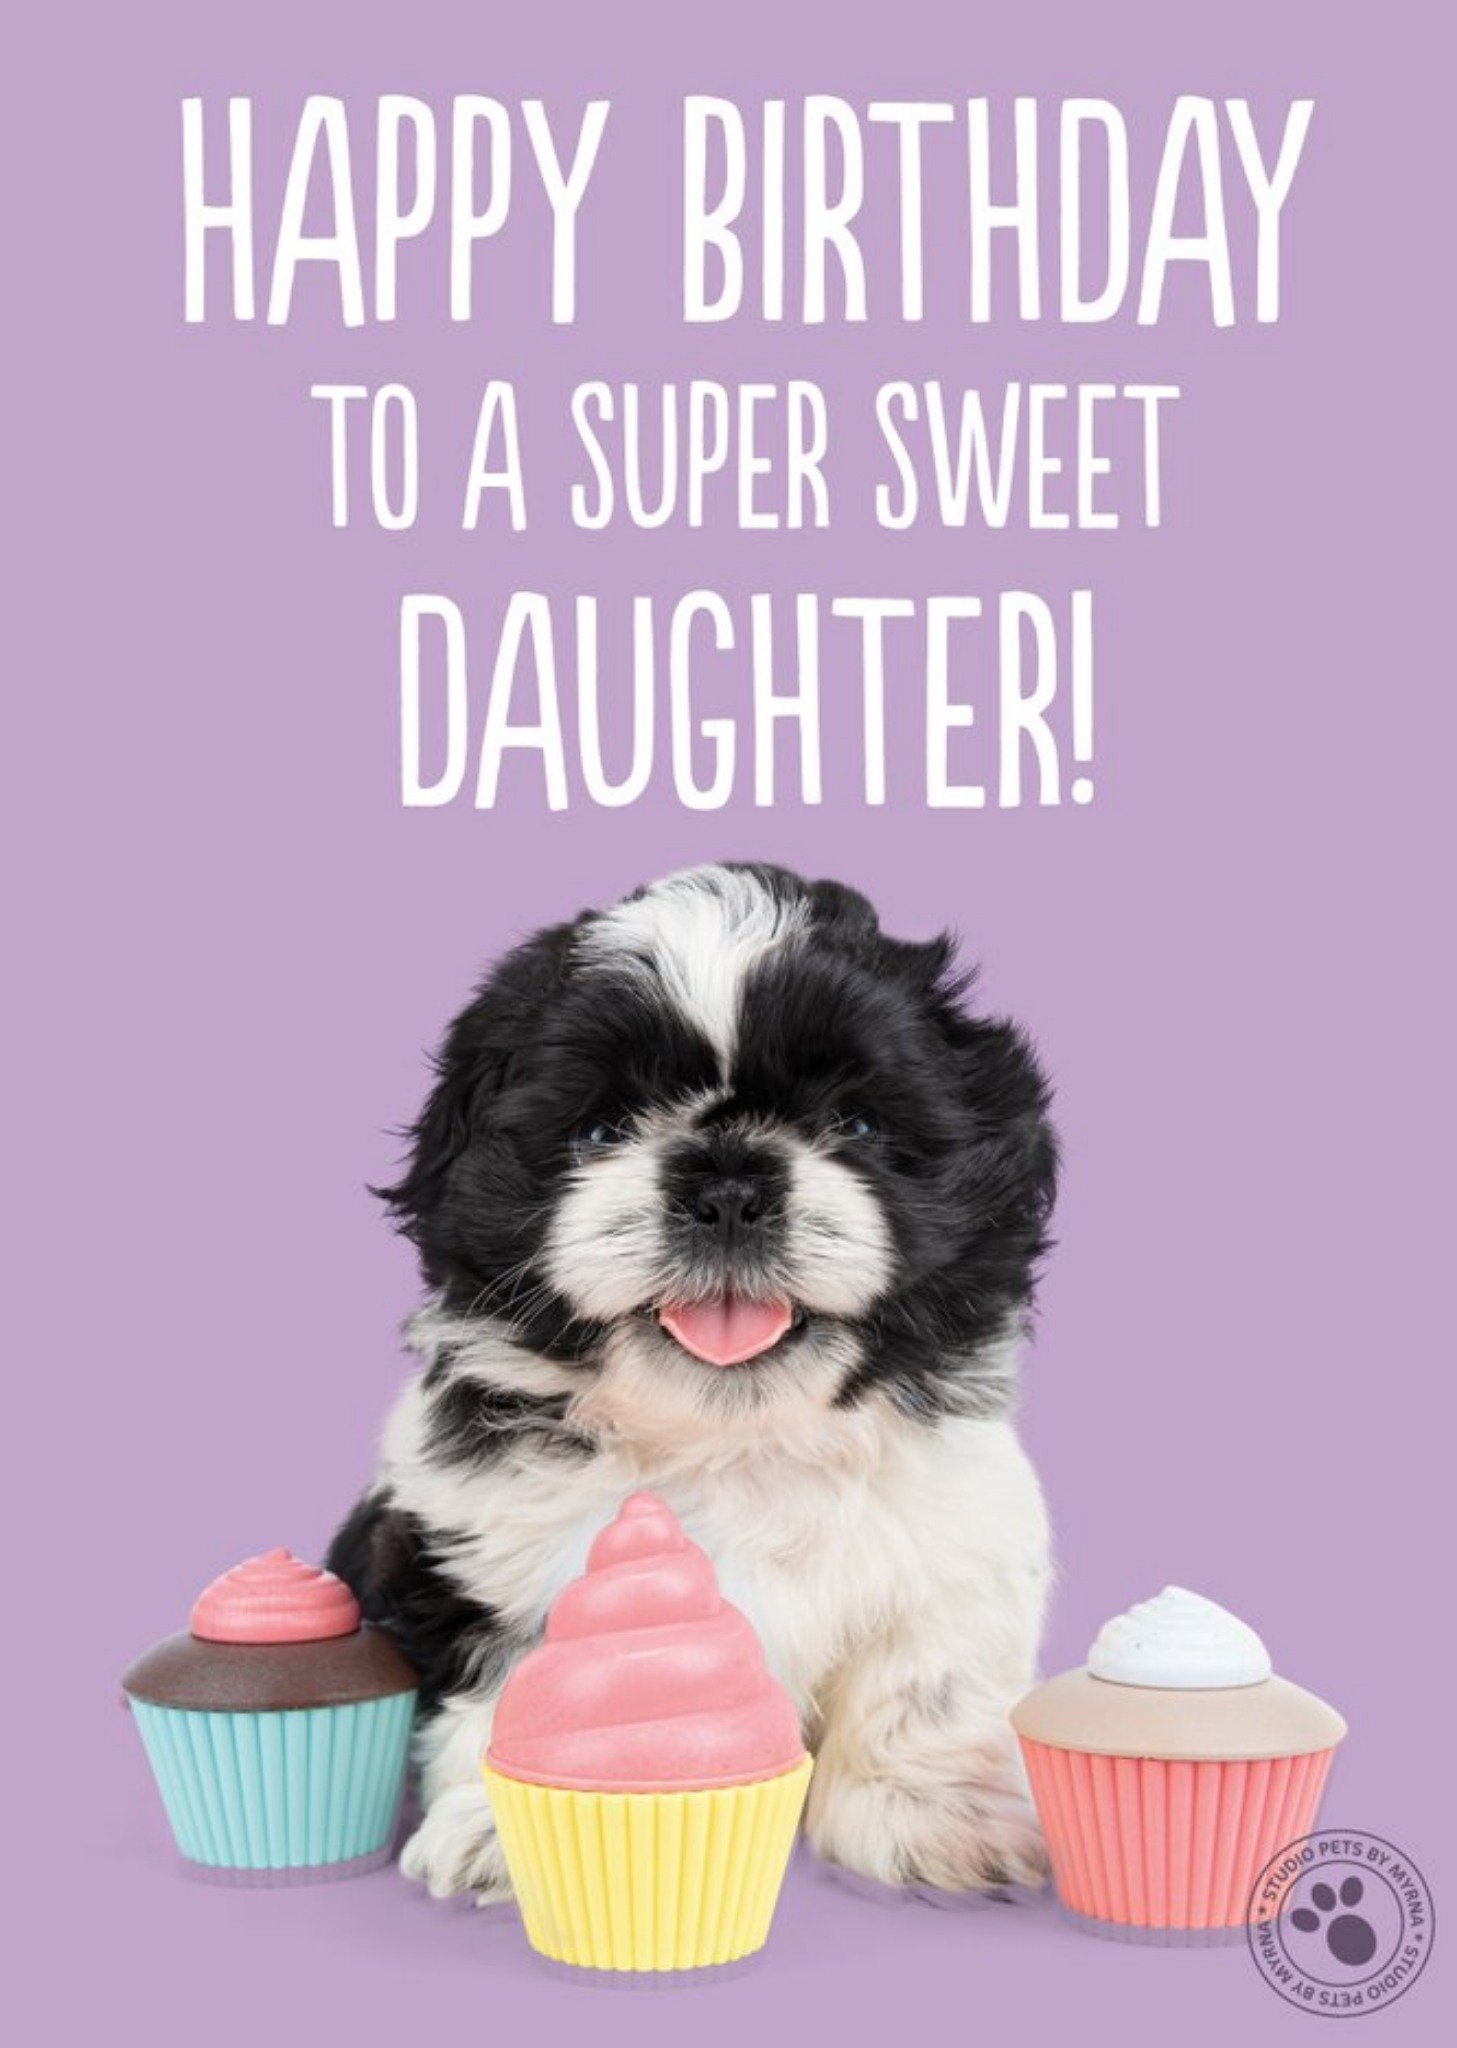 Studio Pets Puppy Super Sweet Daughter Birthday Card, Large